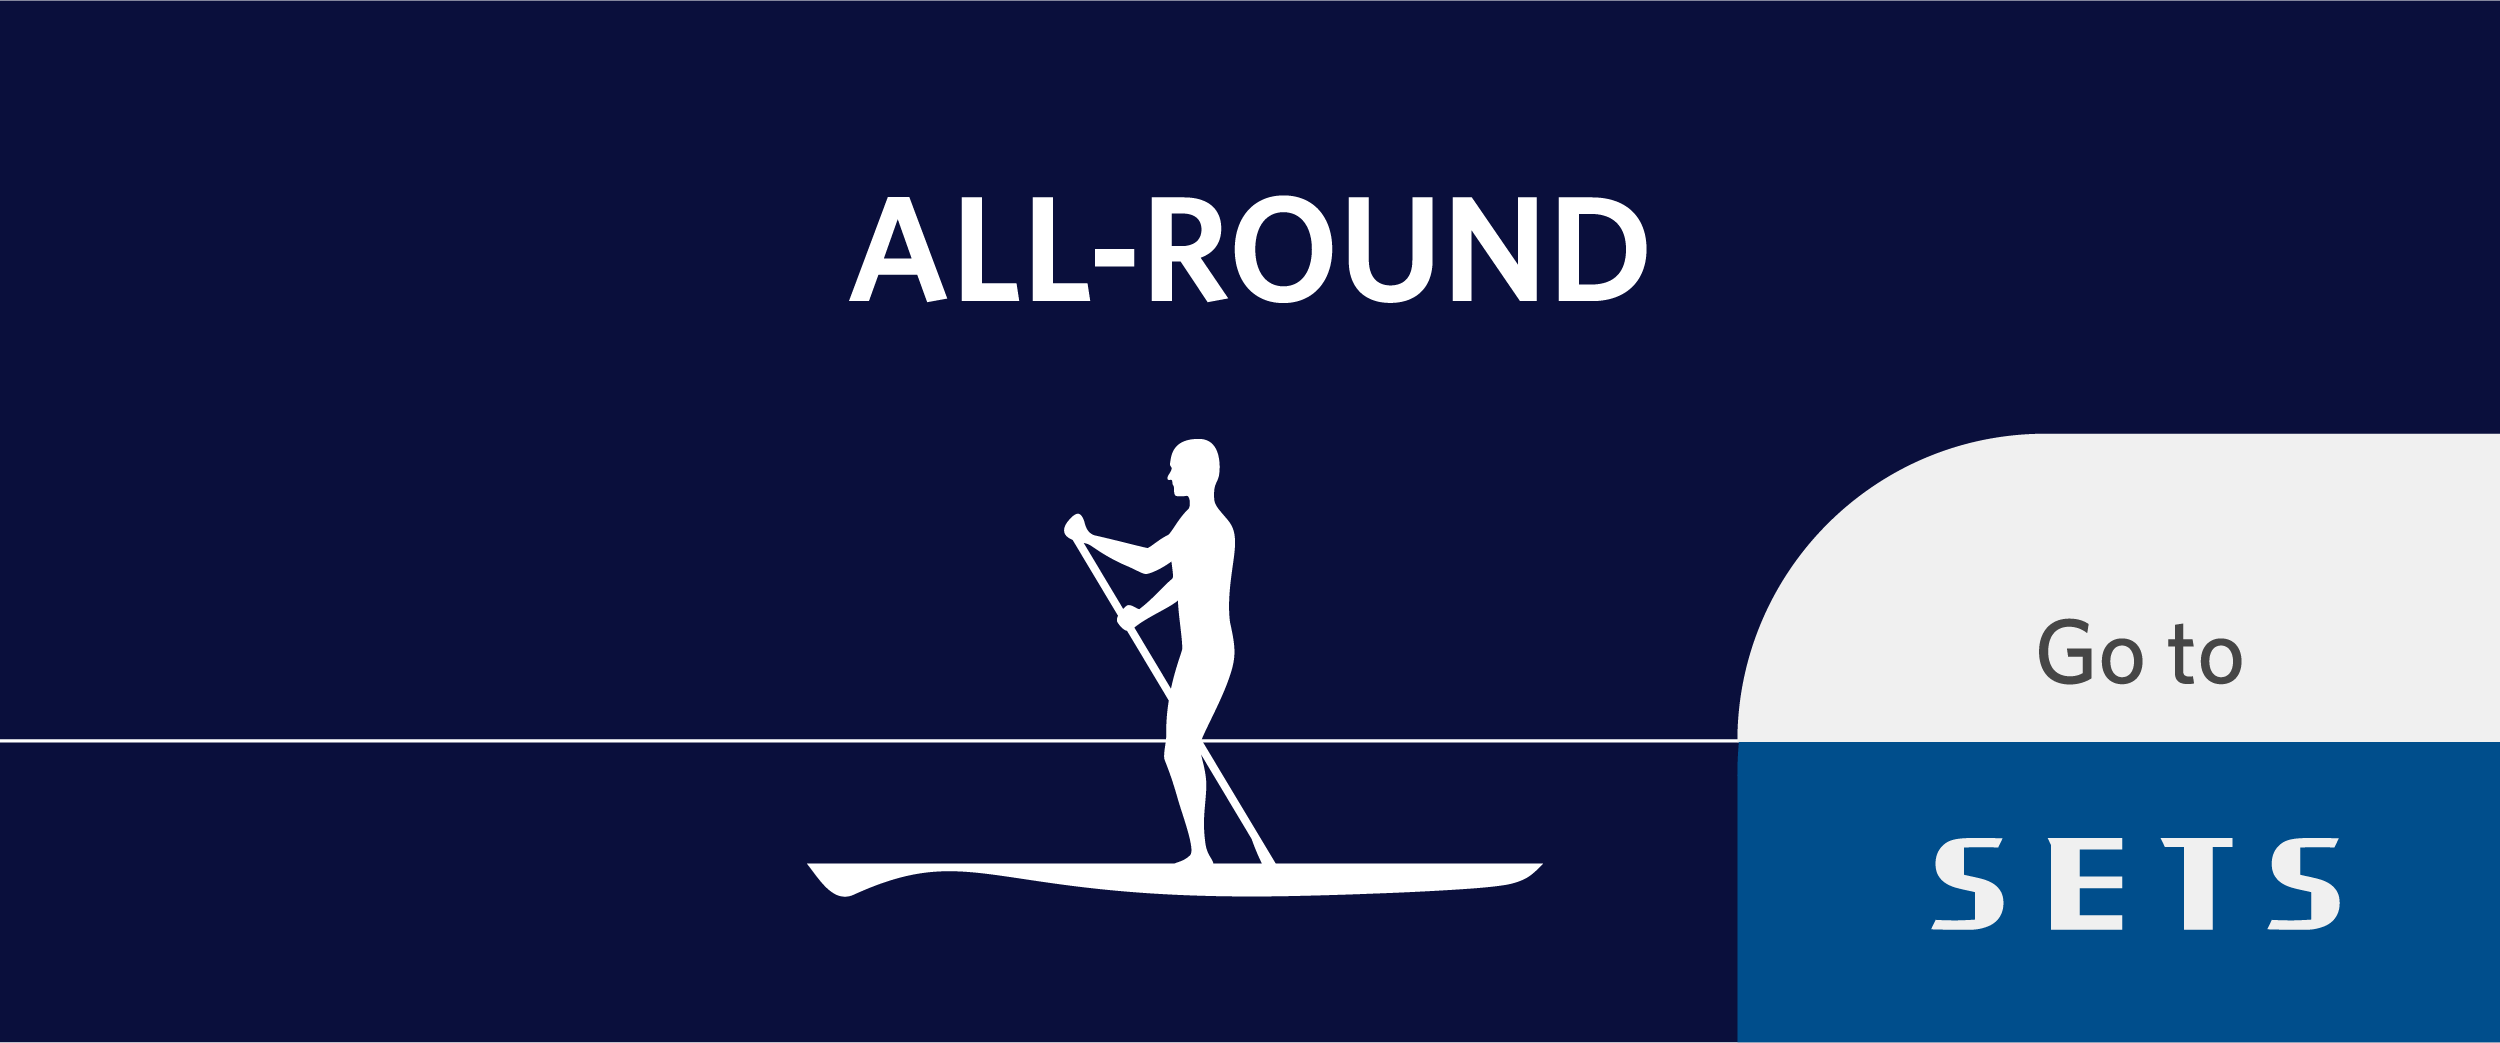 SUP All-round go to sets